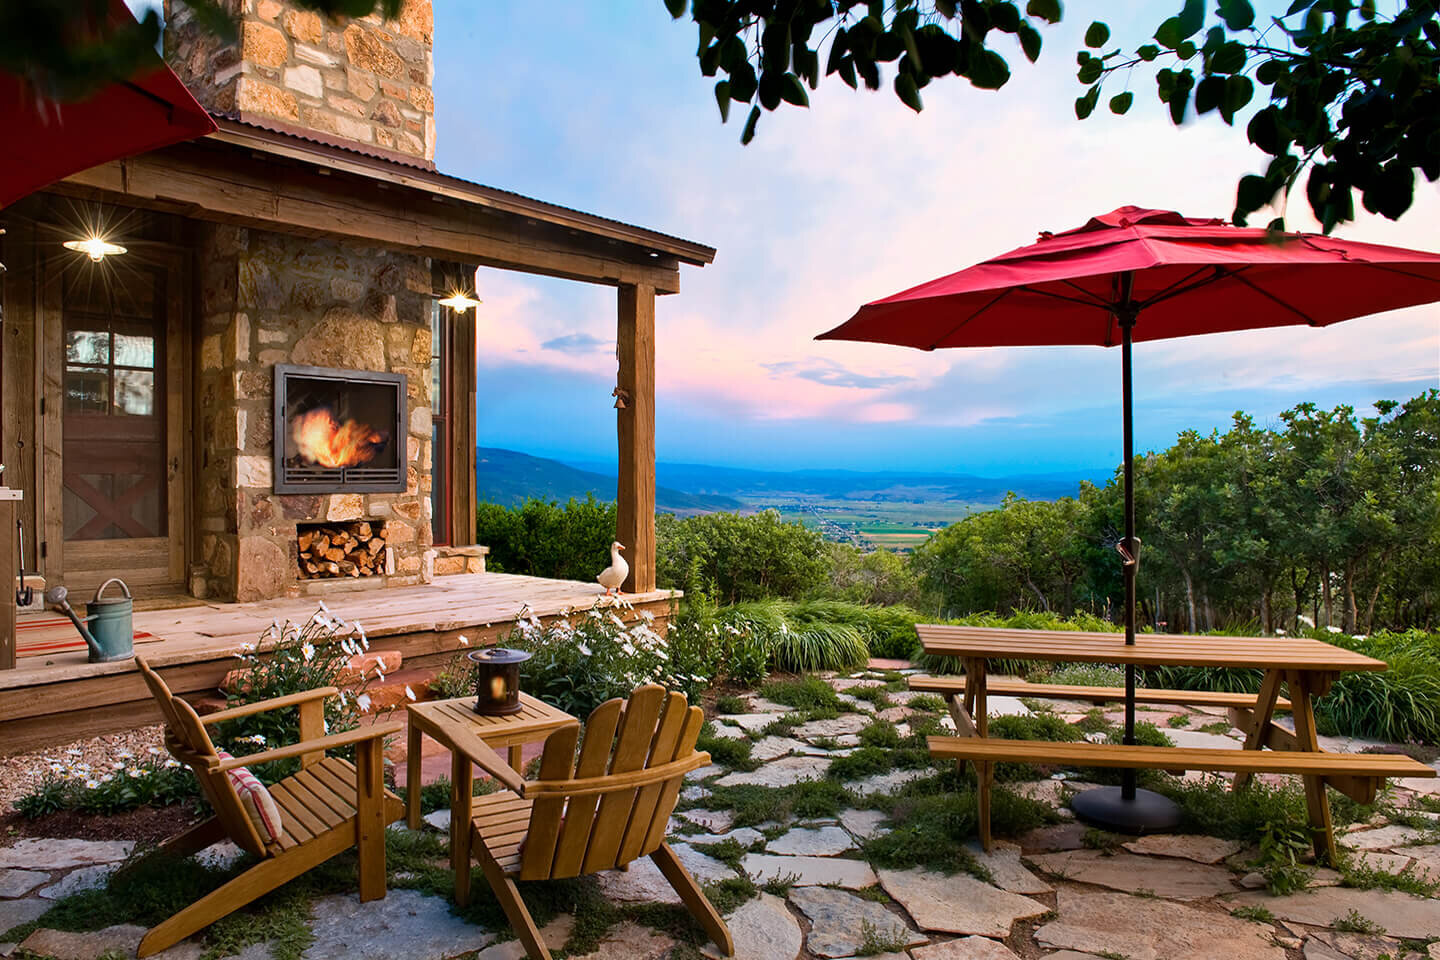 Patio with outdoor fireplace